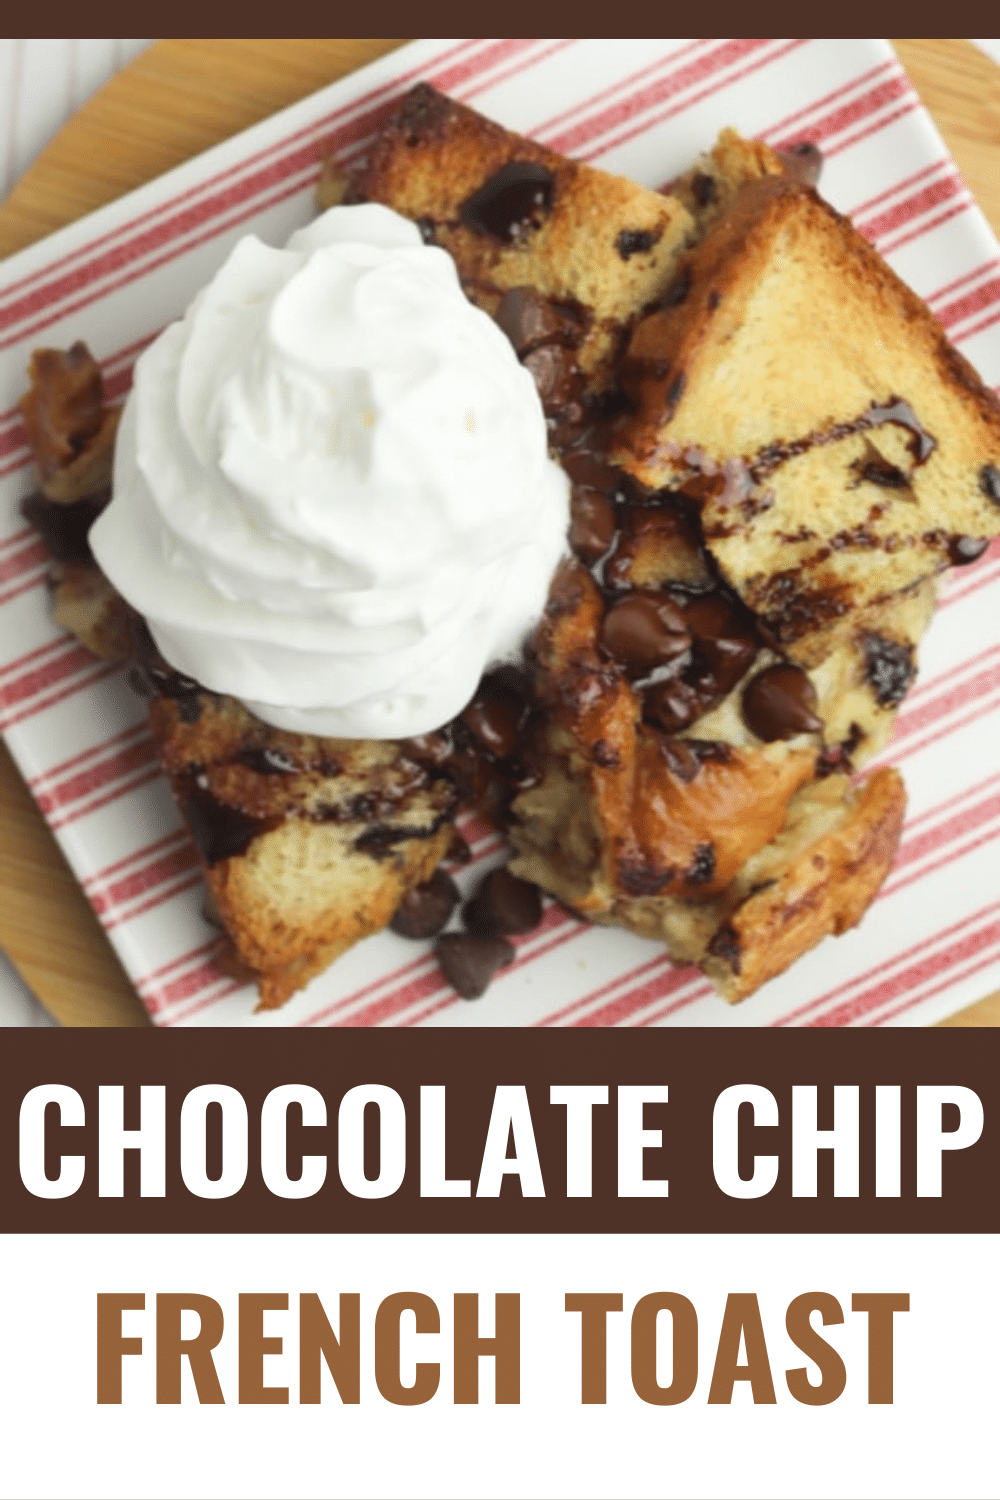 Chocolate Chip French Toast makes a special breakfast or brunch dish the whole family will love. Easy to make and packed with chocolate chips. #frenchtoast #bakedfrenchtoast #breakfast via @wondermomwannab